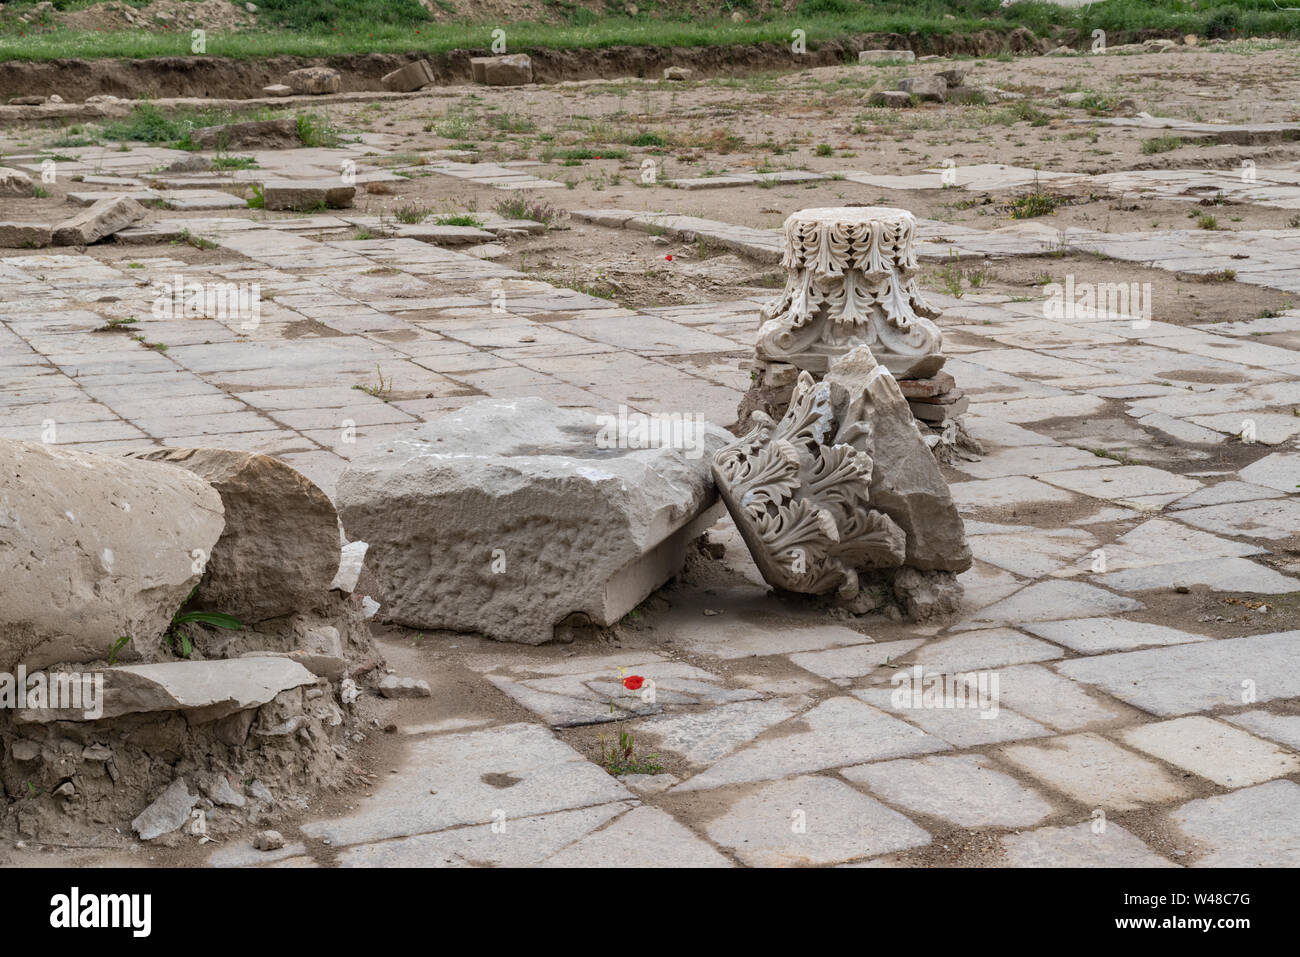 Heraclea Sintica - Ruins of ancient Greek polis, located near town of Petrich, Bulgaria Stock Photo